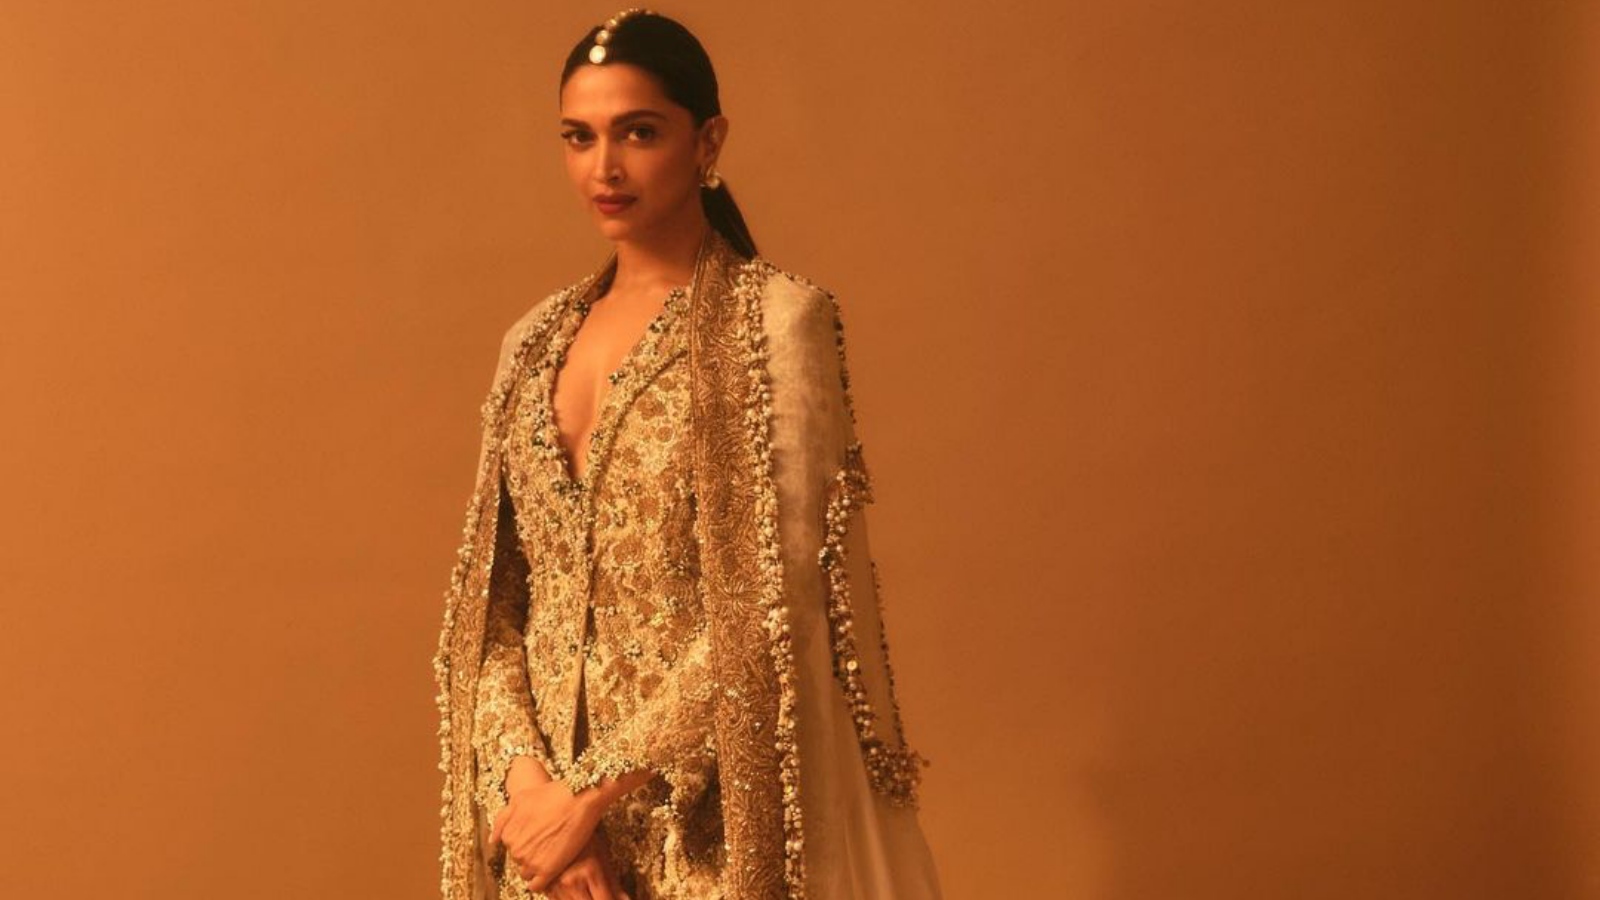 Deepika Padukonesexxxx - Deepika Padukone says she dealt with 'insecurities of insiders' when she  came to Bollywood as a teenager: 'Nepotism existed then, it exists now' |  Bollywood News - The Indian Express